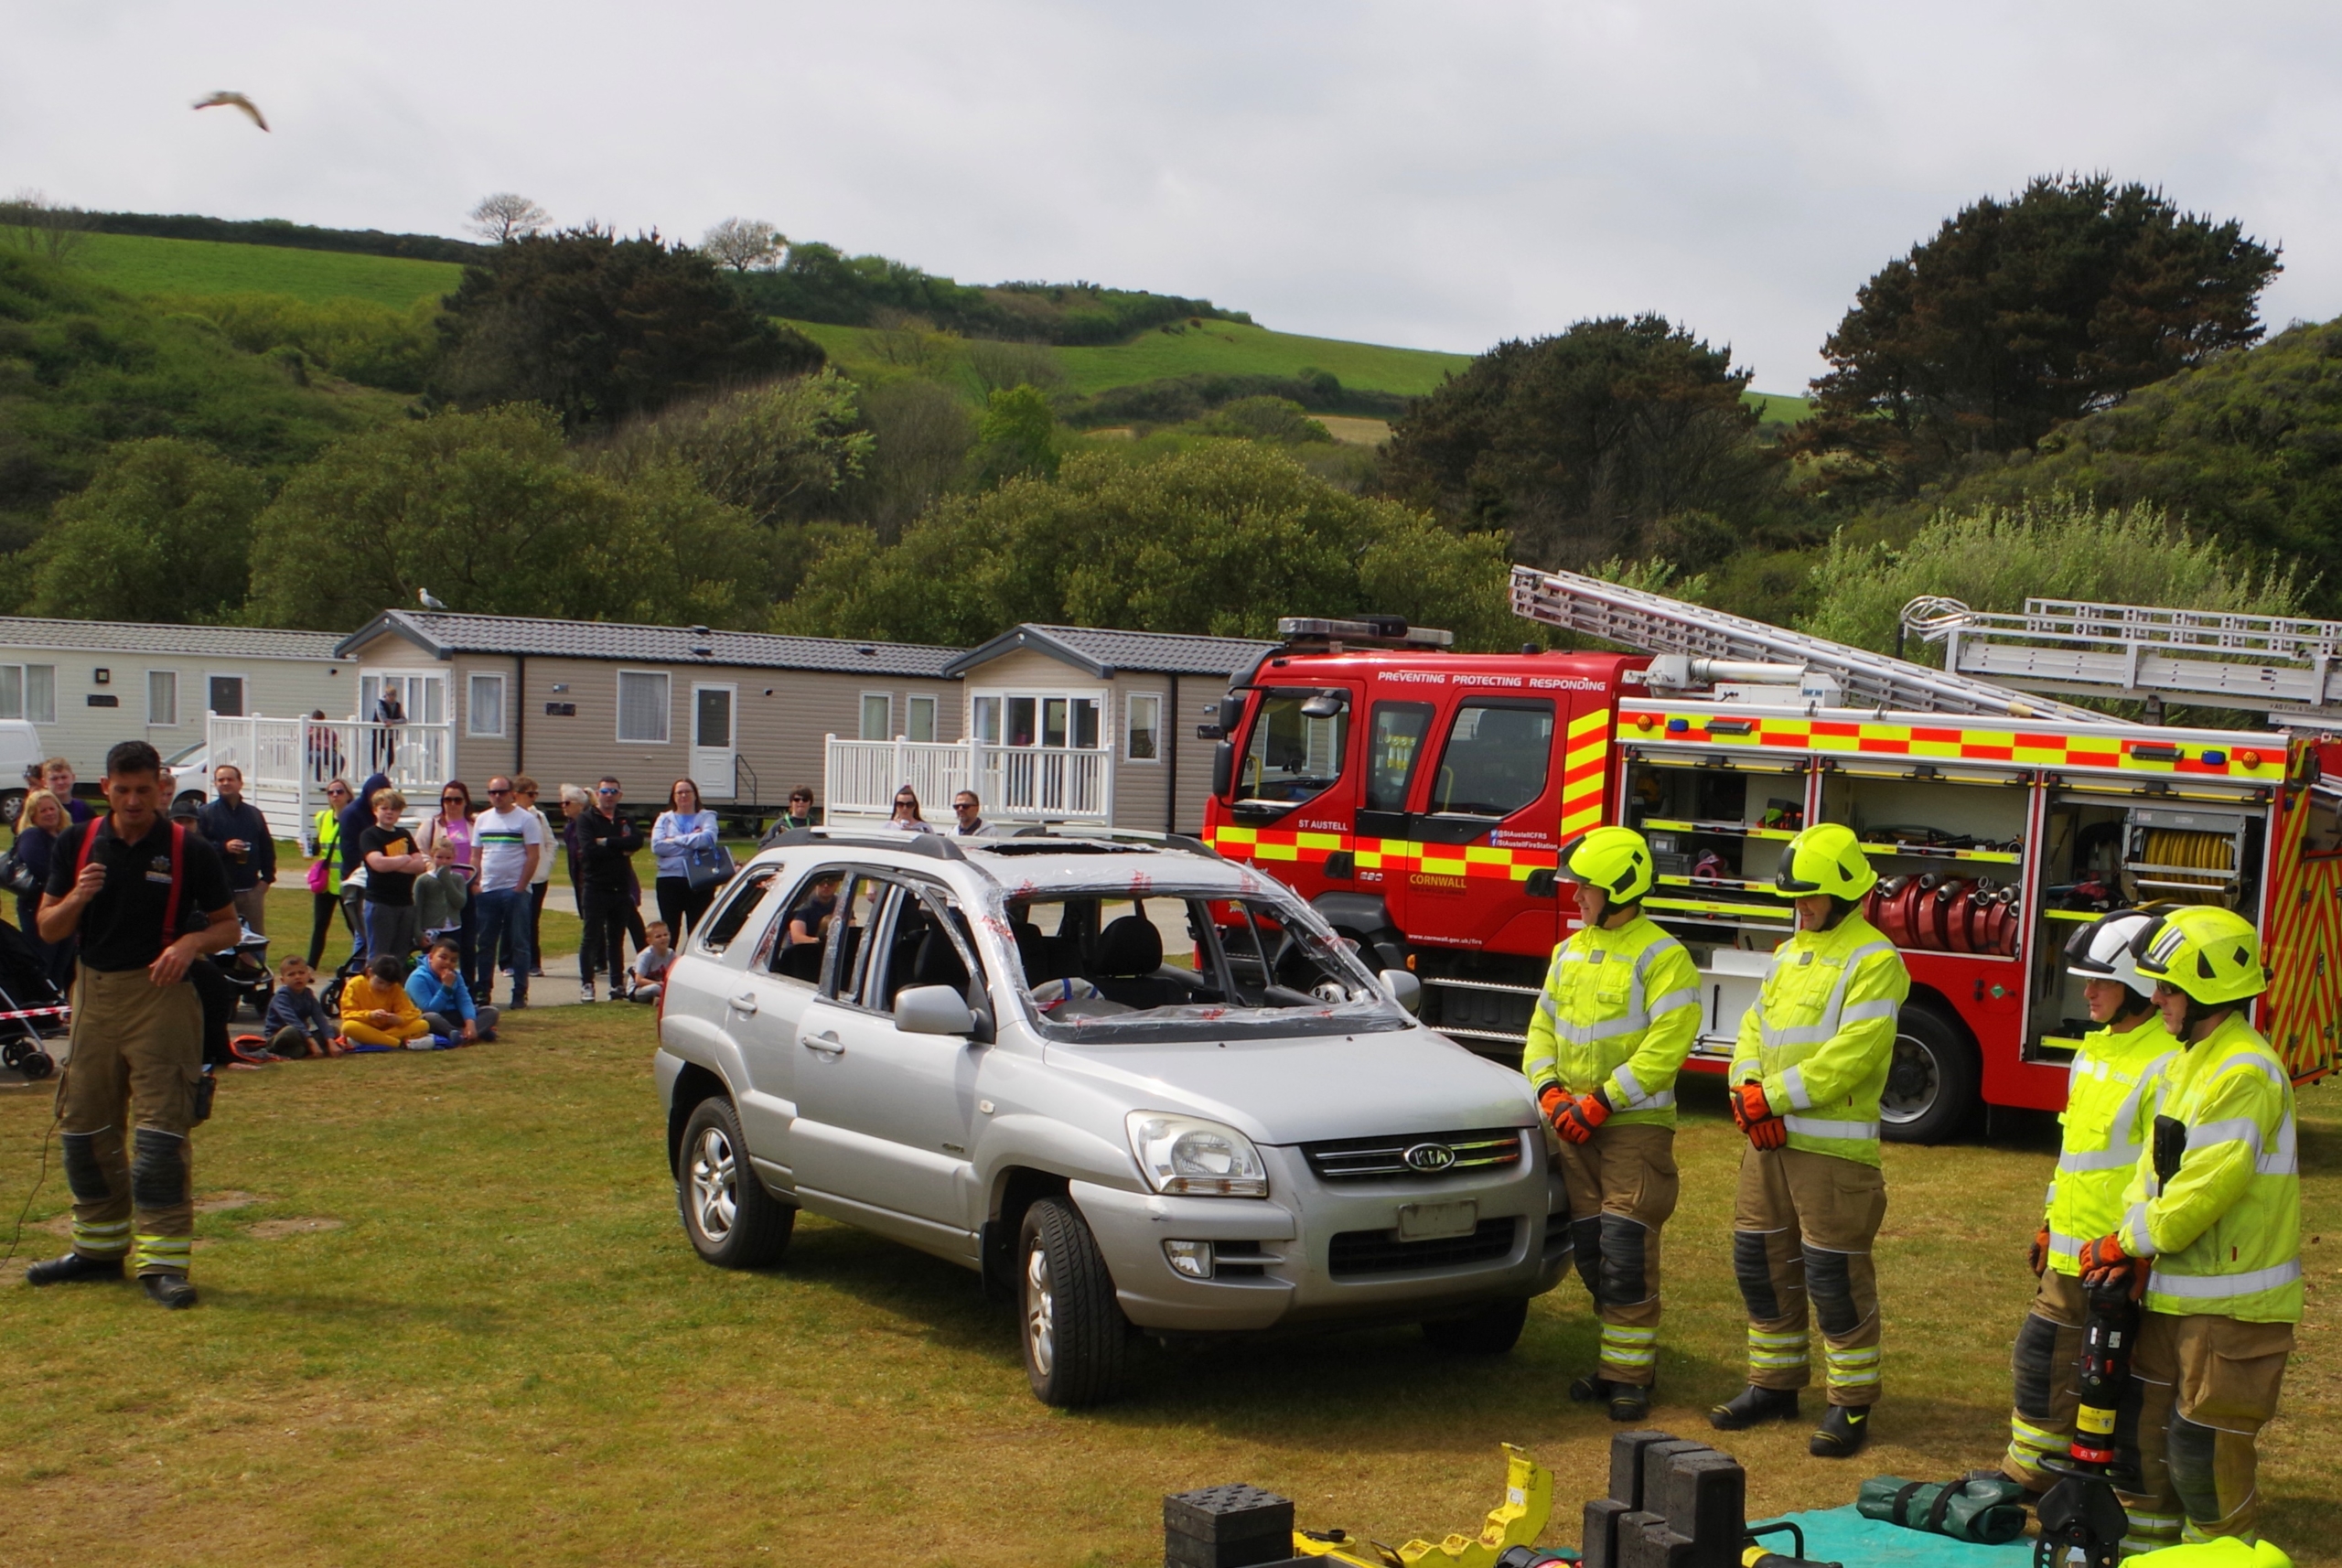 Road accident response demo by St Austell Fire Service